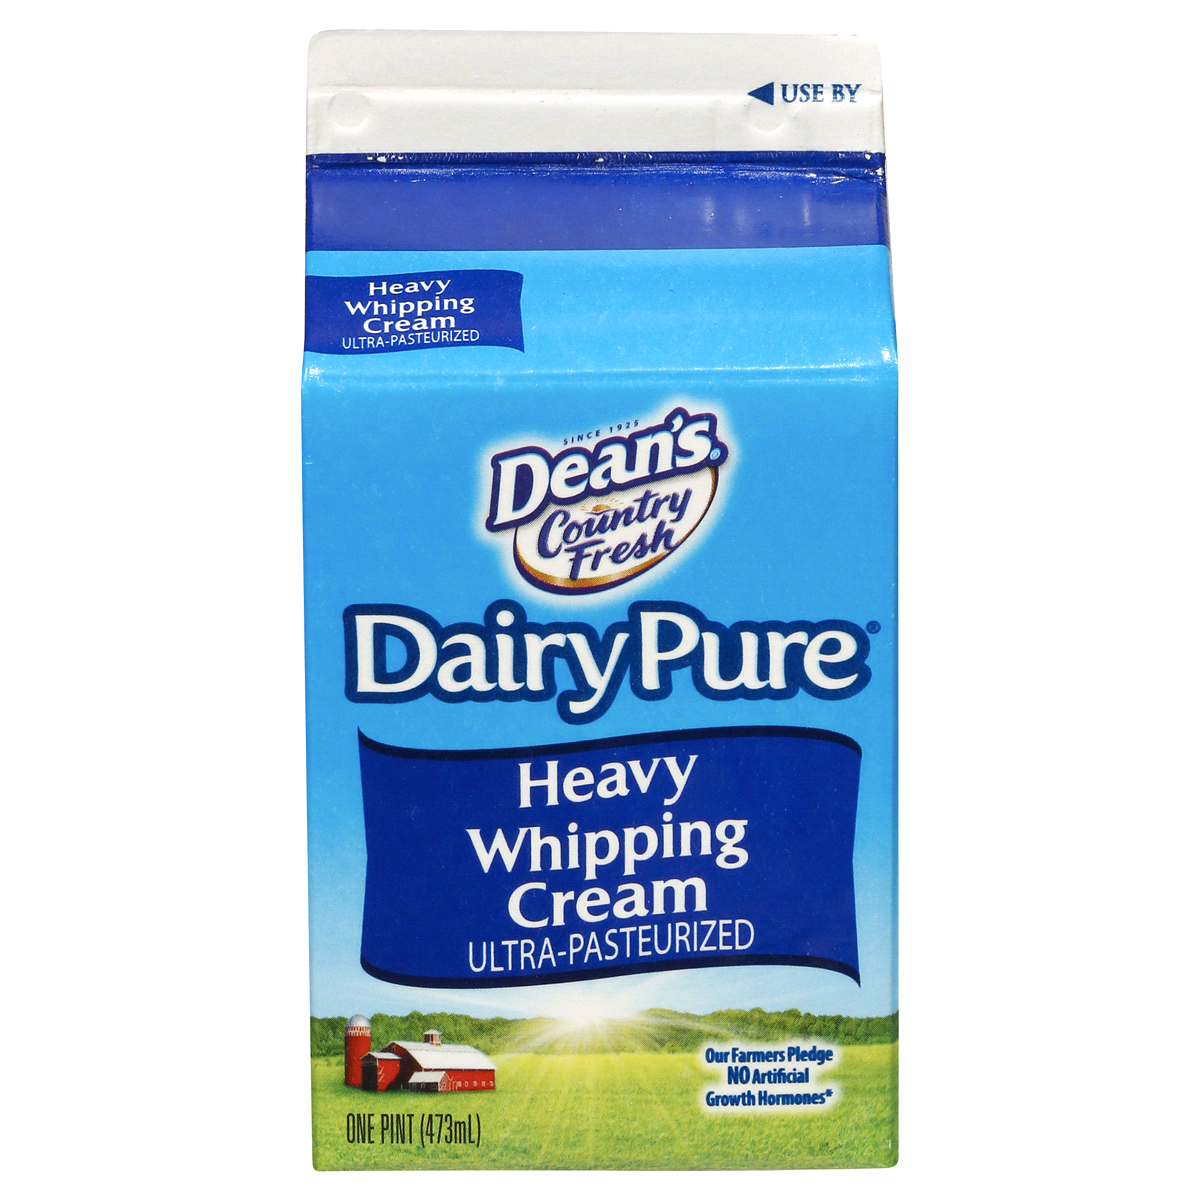 slide 5 of 6, Dairy Pure Heavy Whipping Cream, 1 pint